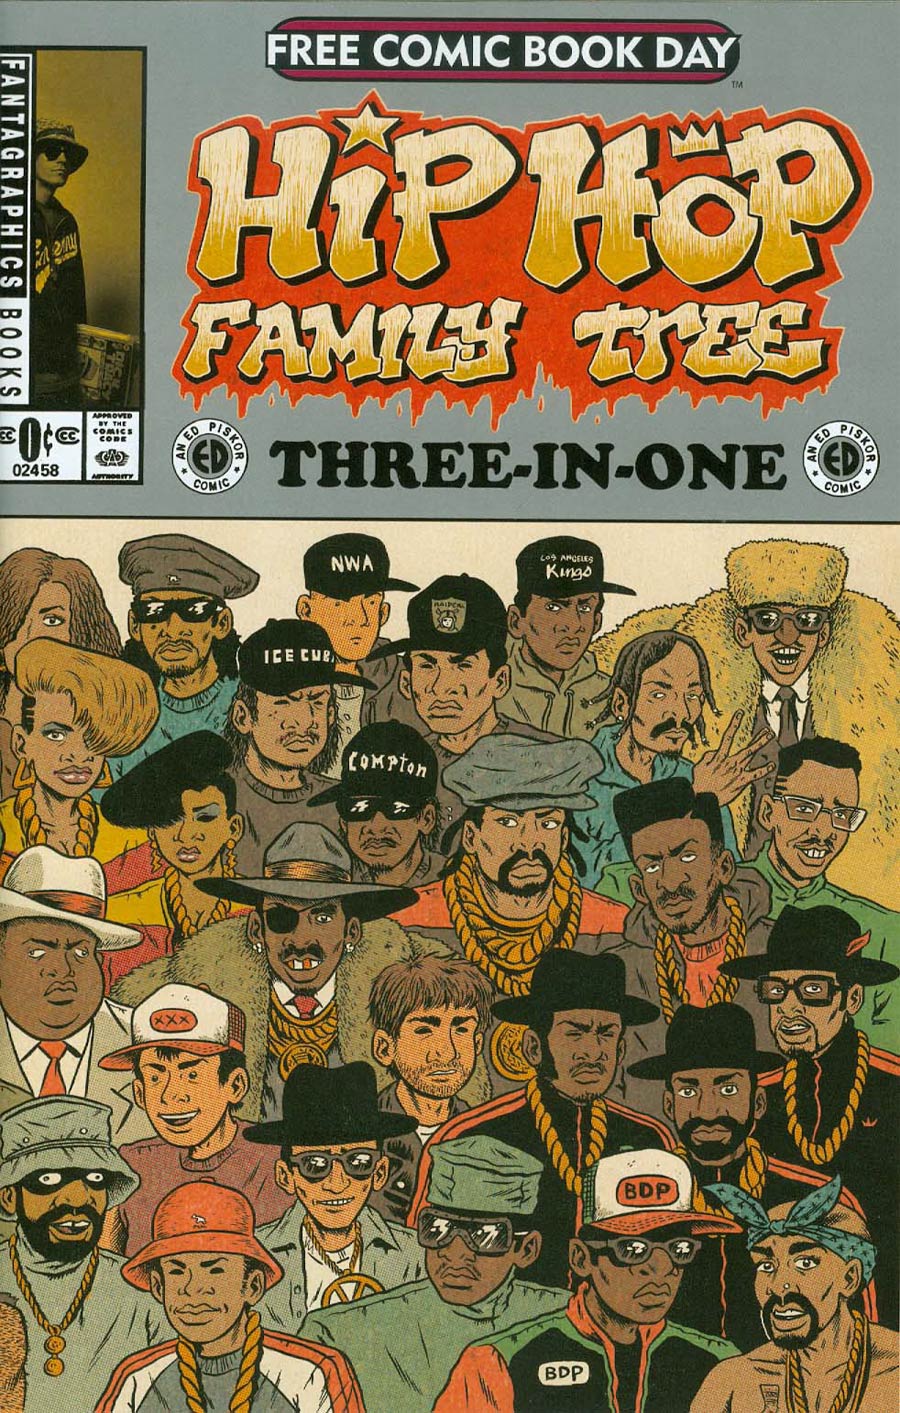 FCBD 2015 Hip Hop Family Tree 3-In-1 Featuring Cosplayers